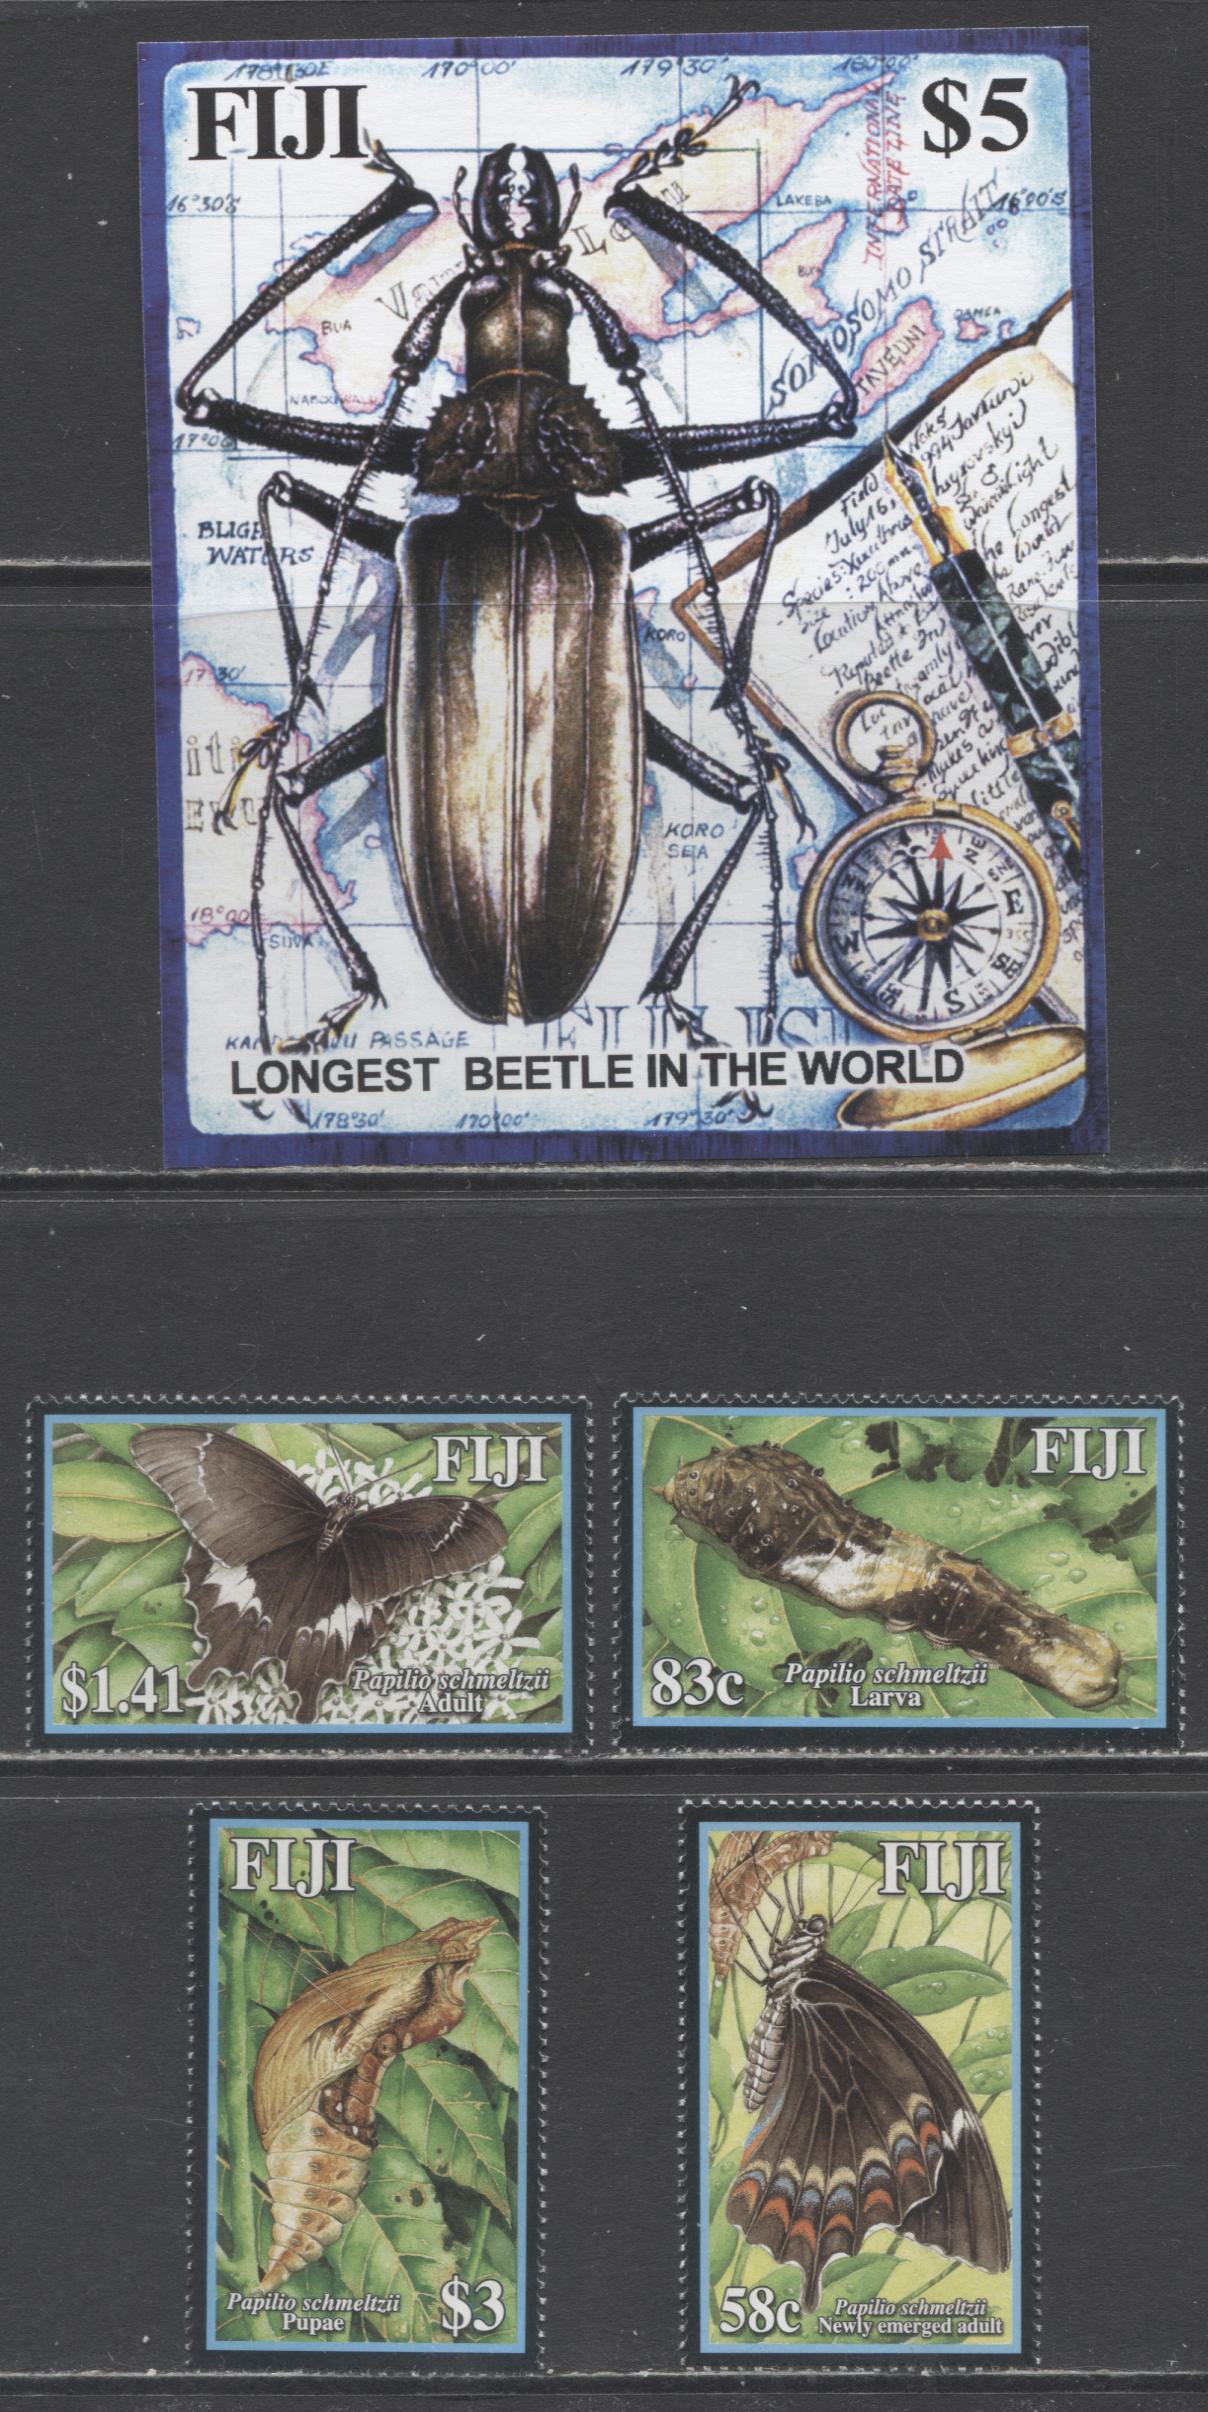 Lot 182 Fiji SC#1005/1032 2003-2004 Beetle & Moth Issues, 5 VFNH Singles & Souvenir Sheet, Click on Listing to See ALL Pictures, 2017 Scott Cat. $18